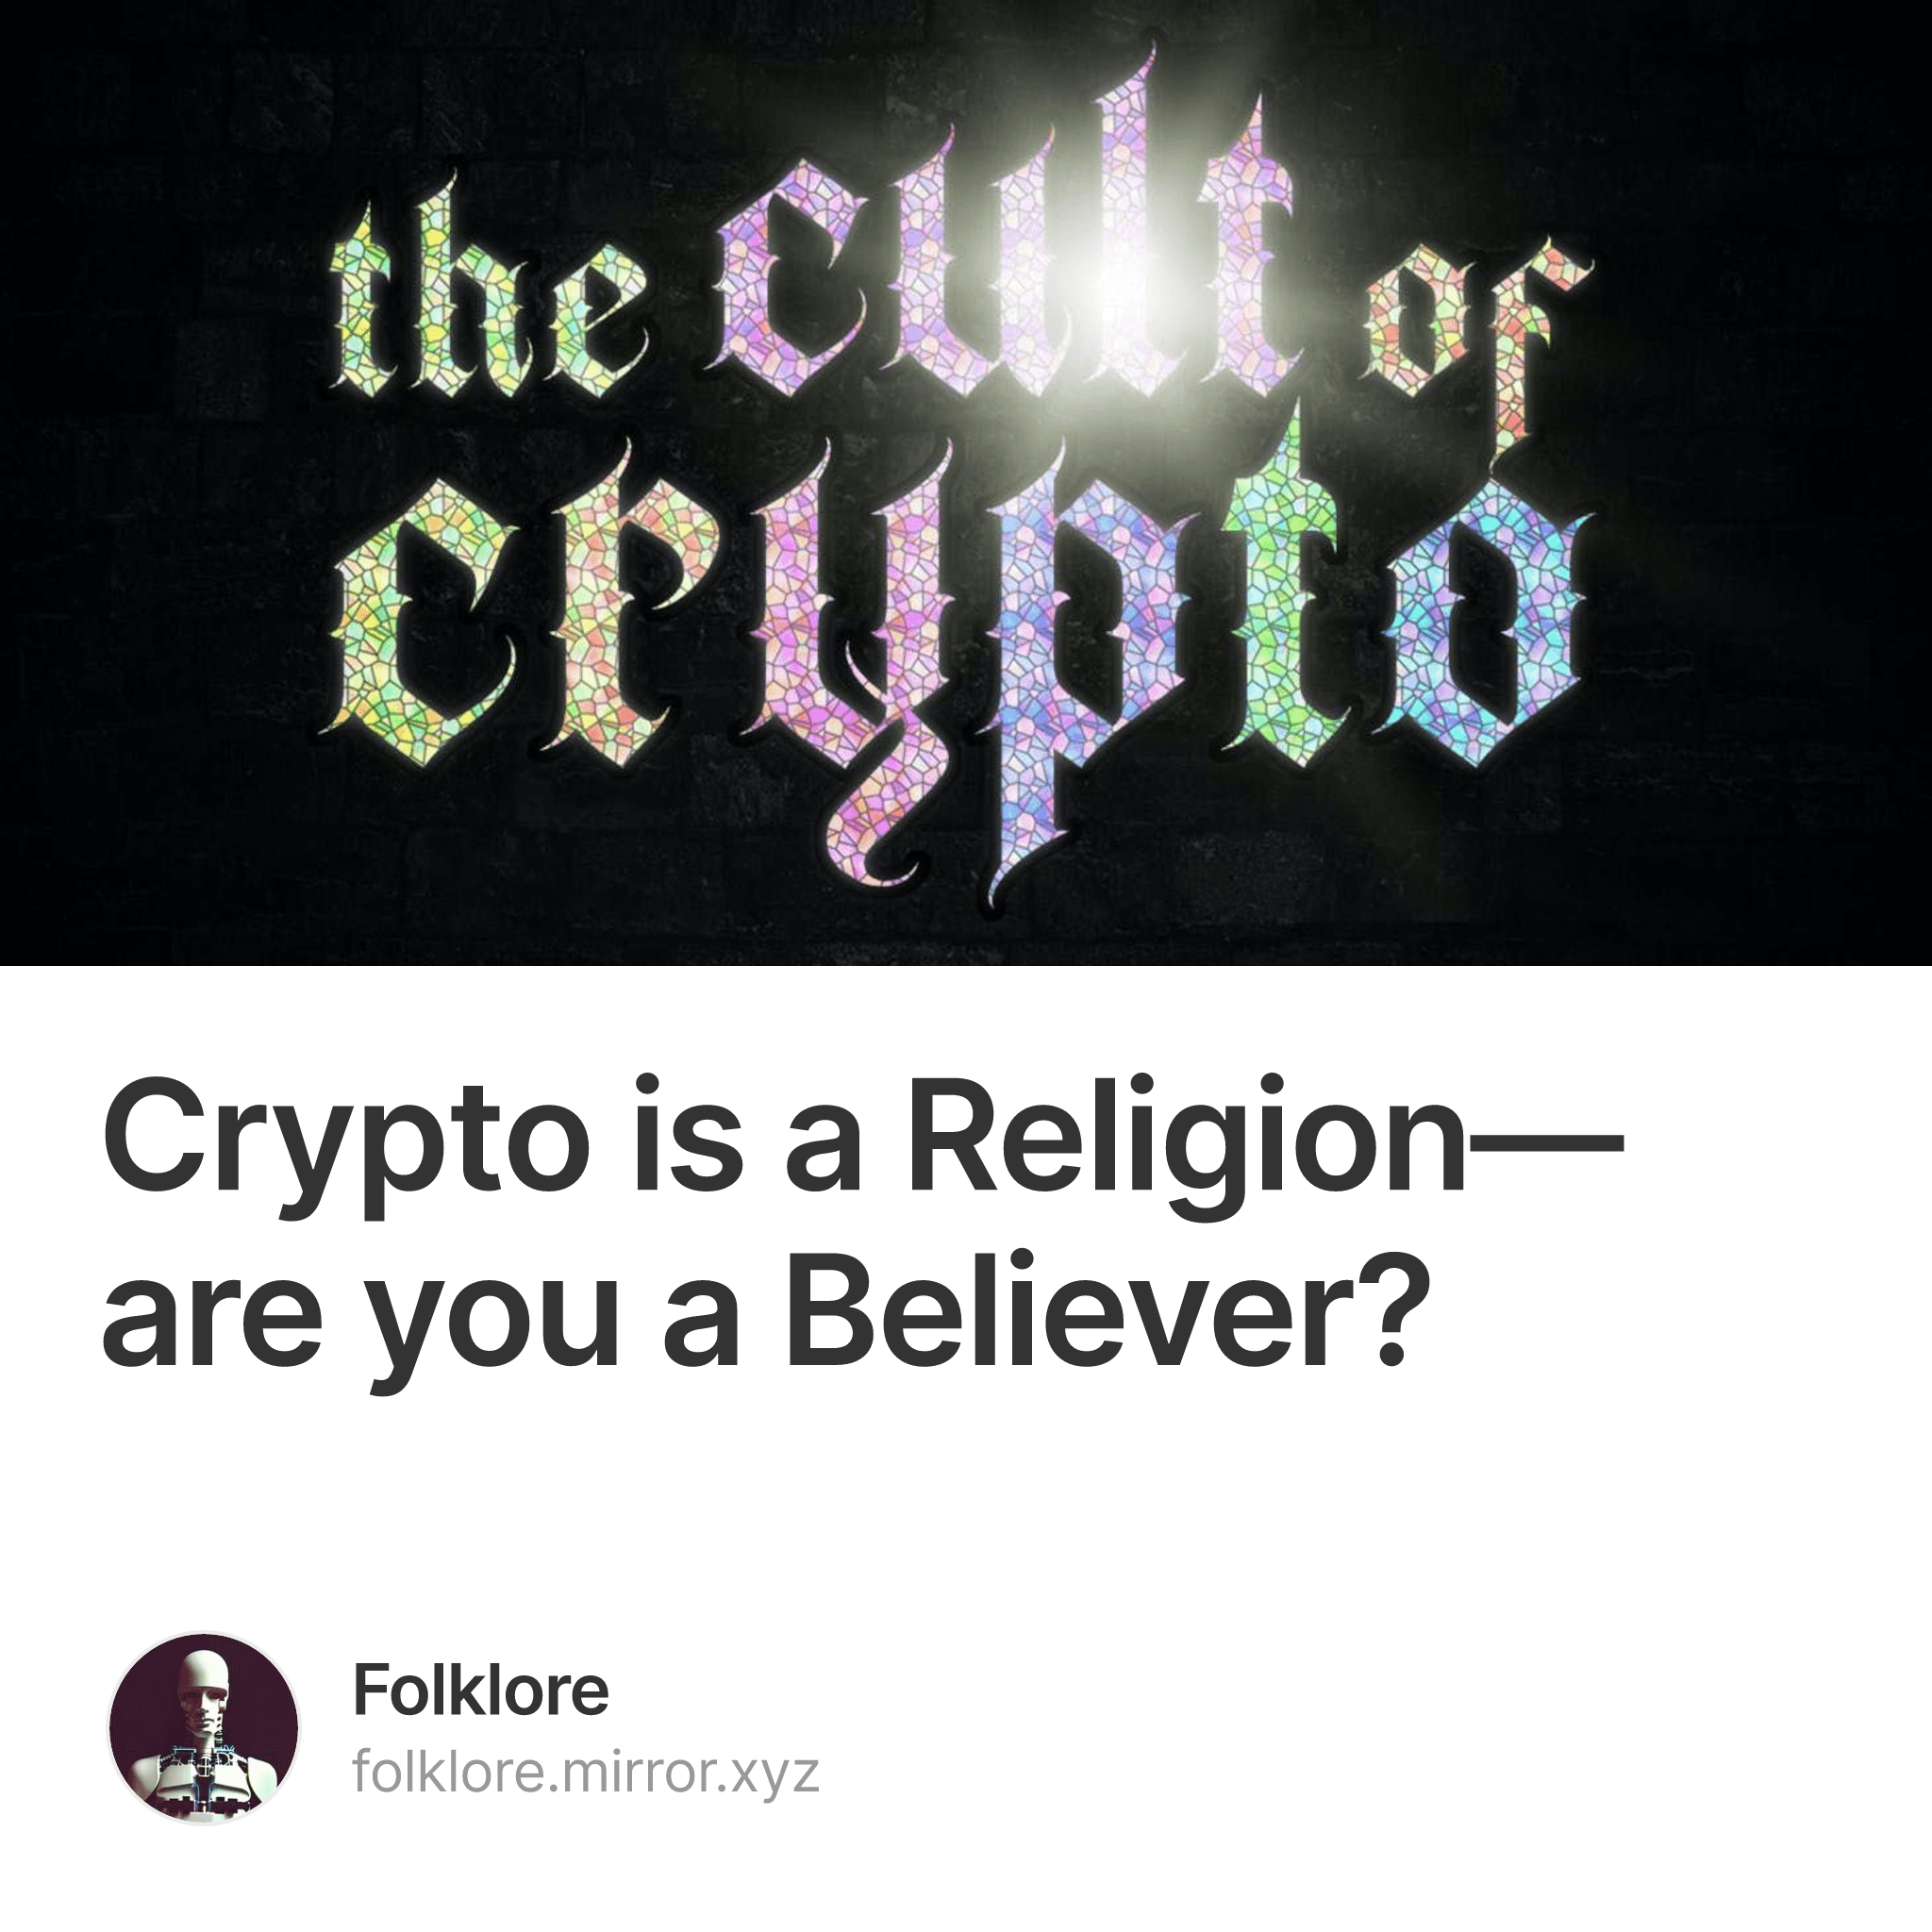 Crypto is a Religion—are you a Believer? 4/25